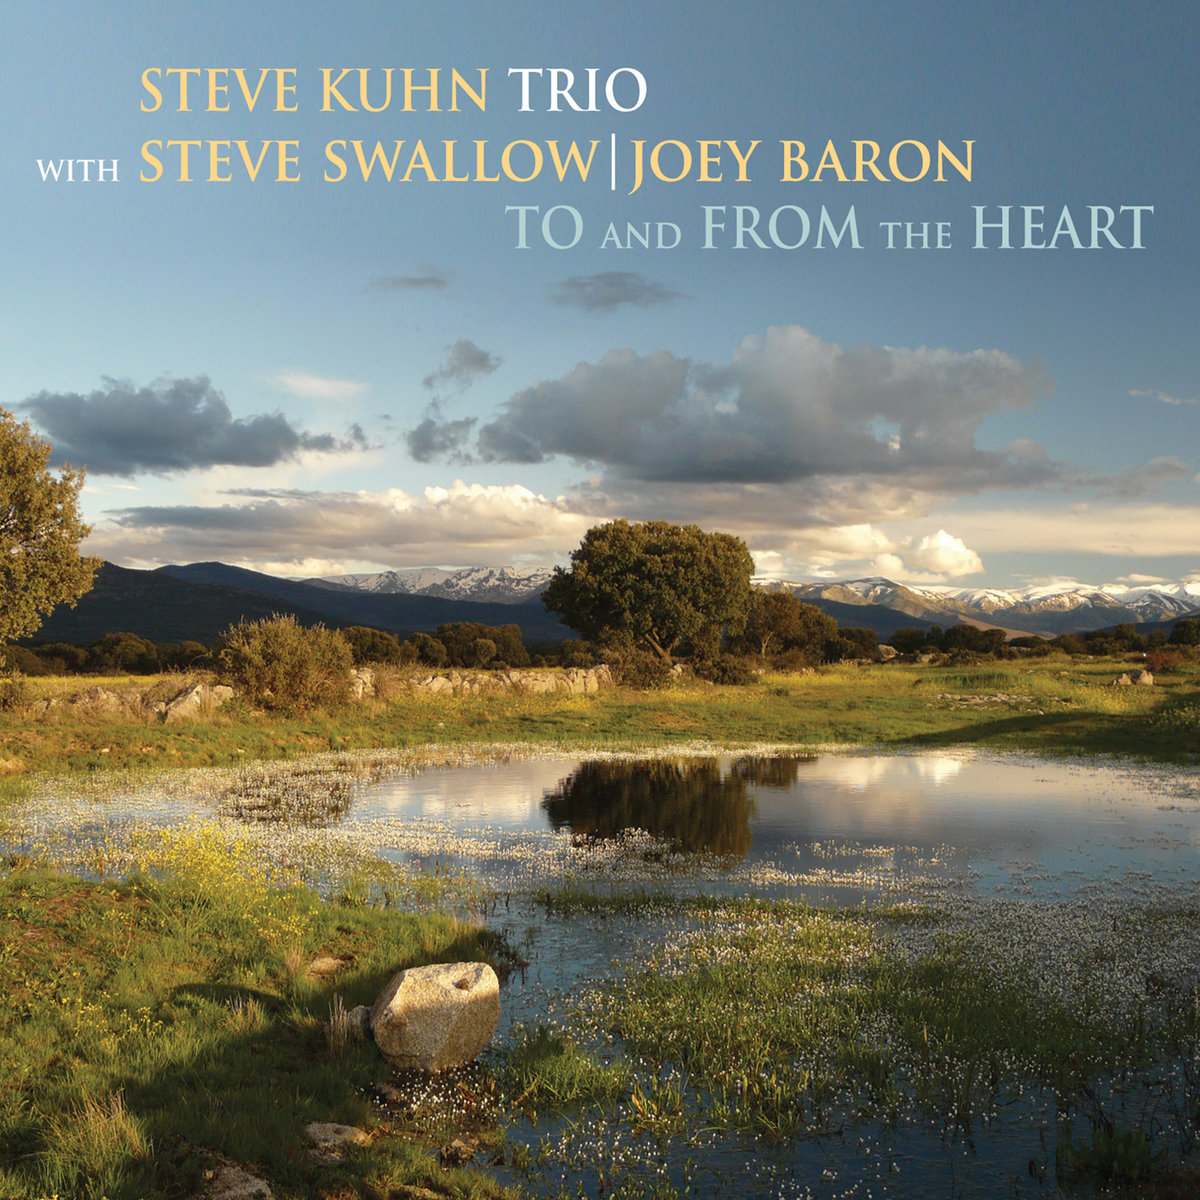 Steve Kuhn Trio - To and from the Heart (2018) [FLAC 24bit/96kHz]